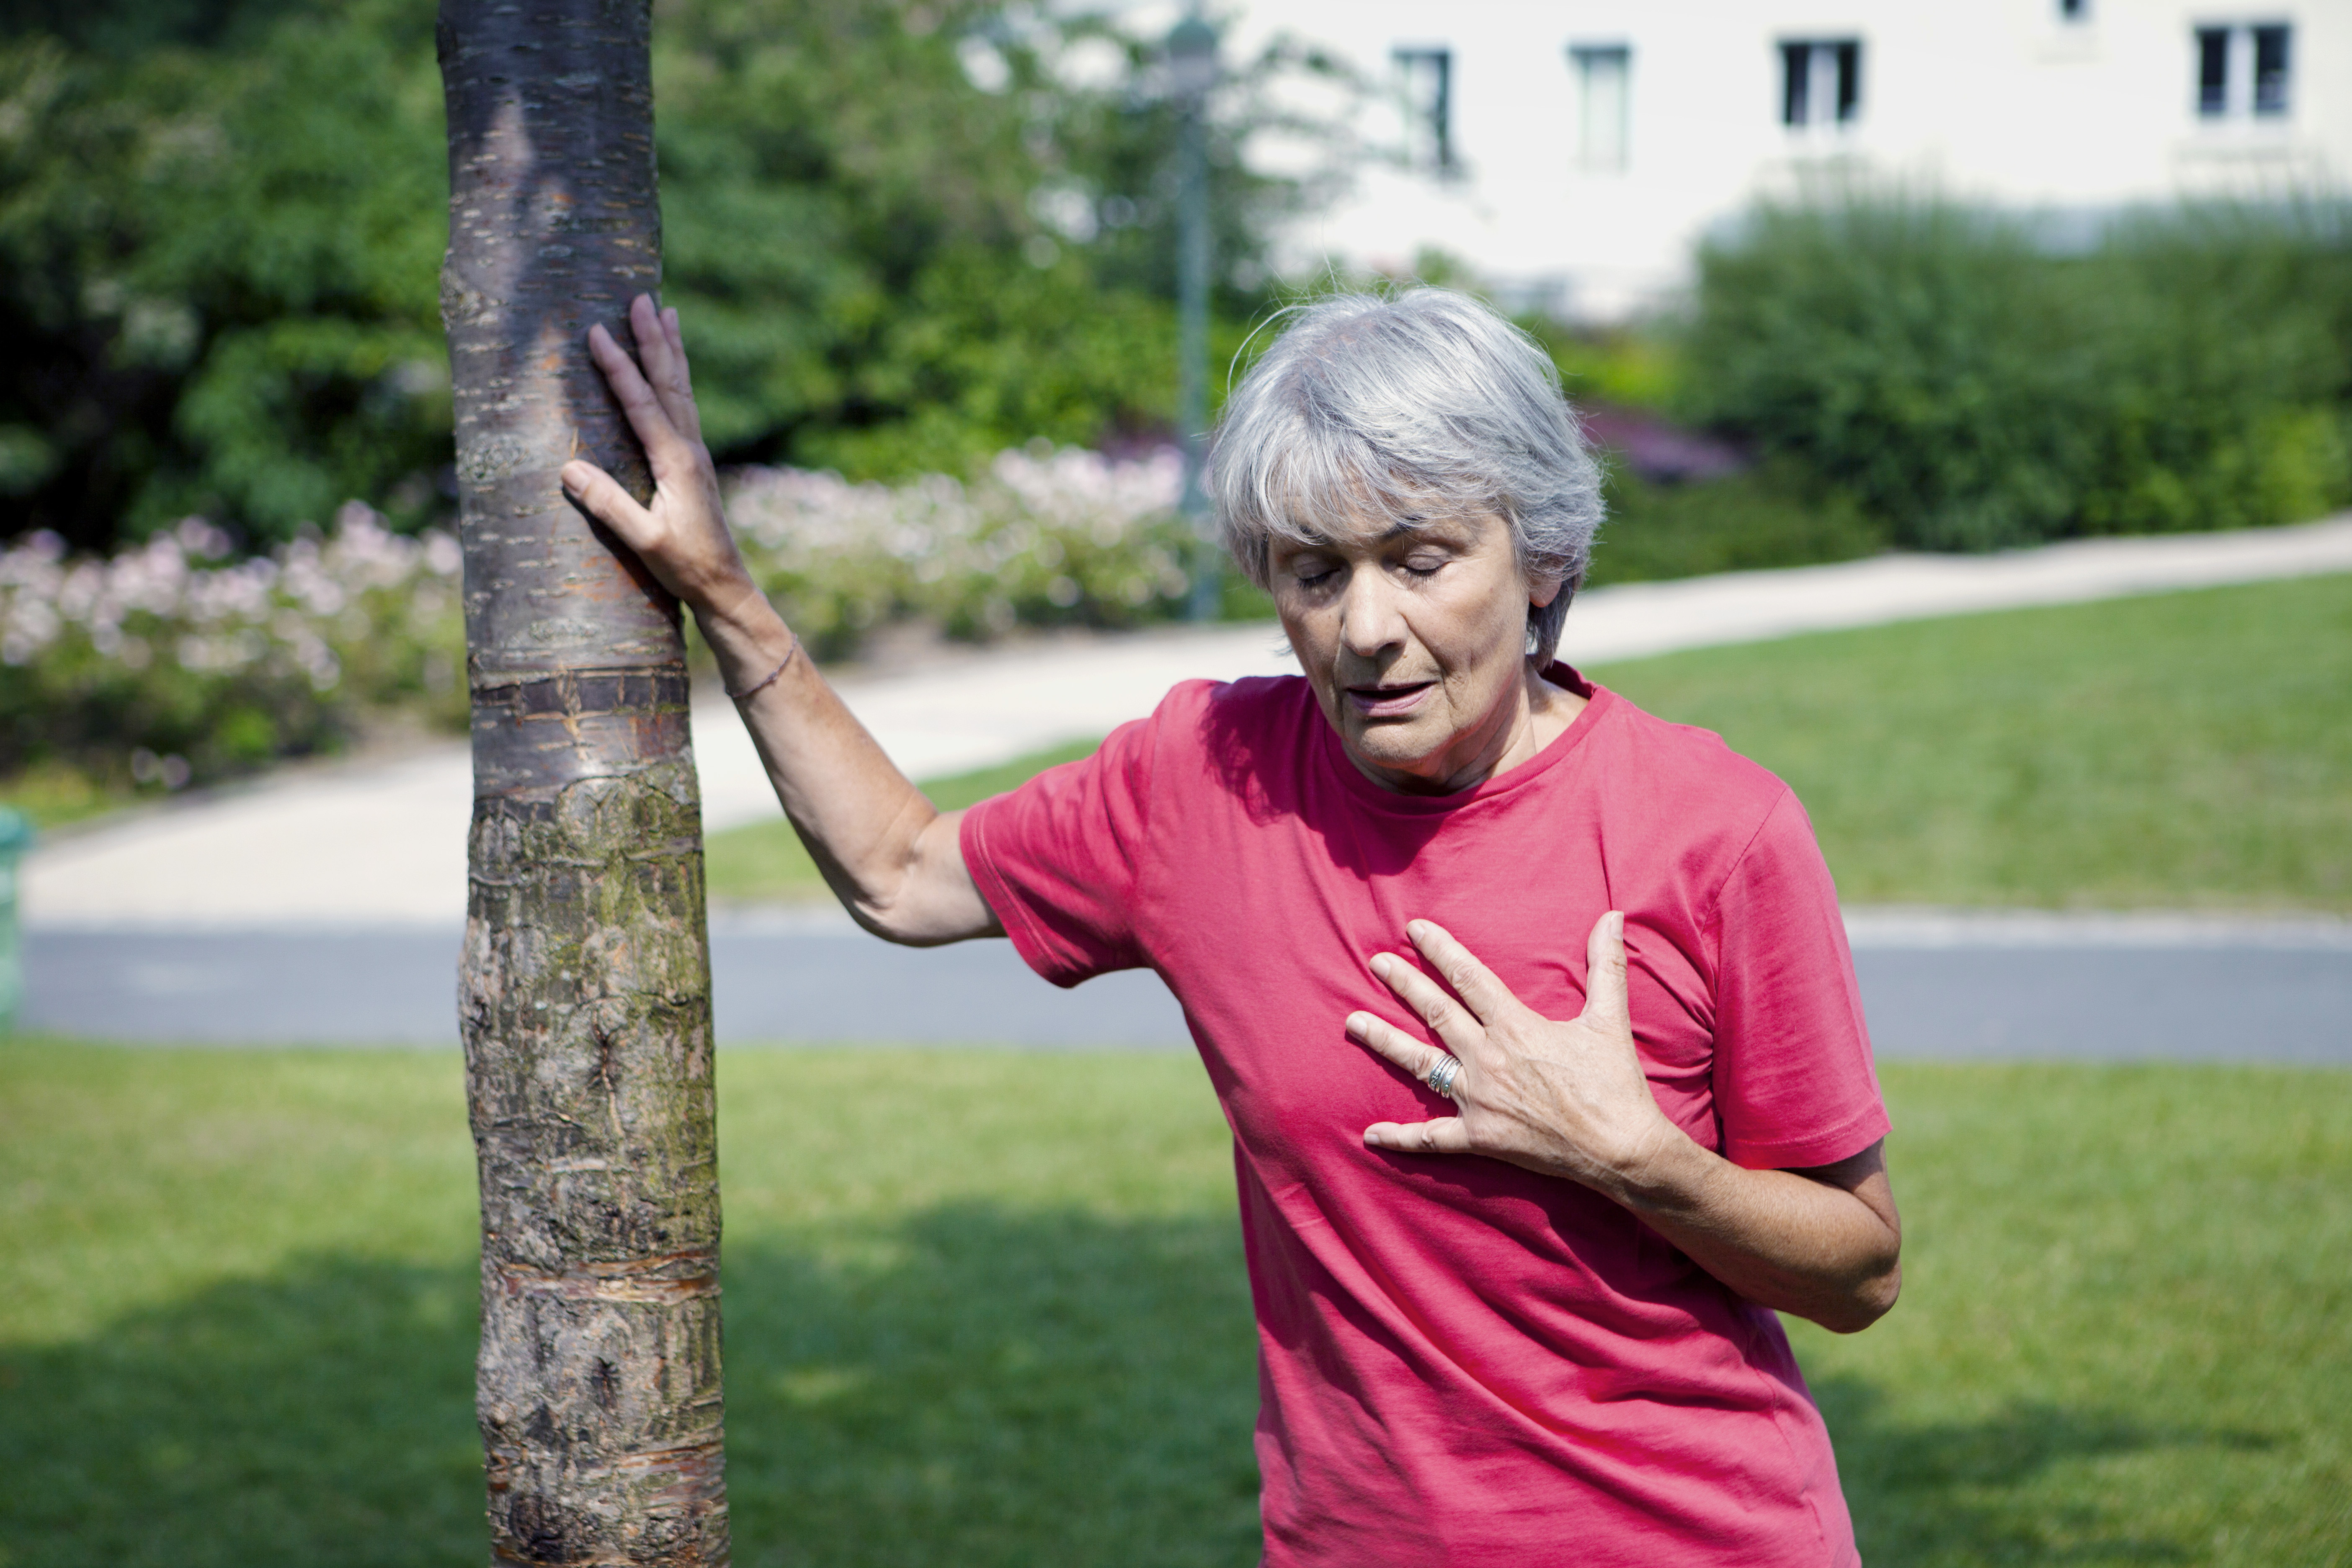 Anemia Reduces Exercise Capacity, Negatively Impacts Quality of Life in COPD Patients